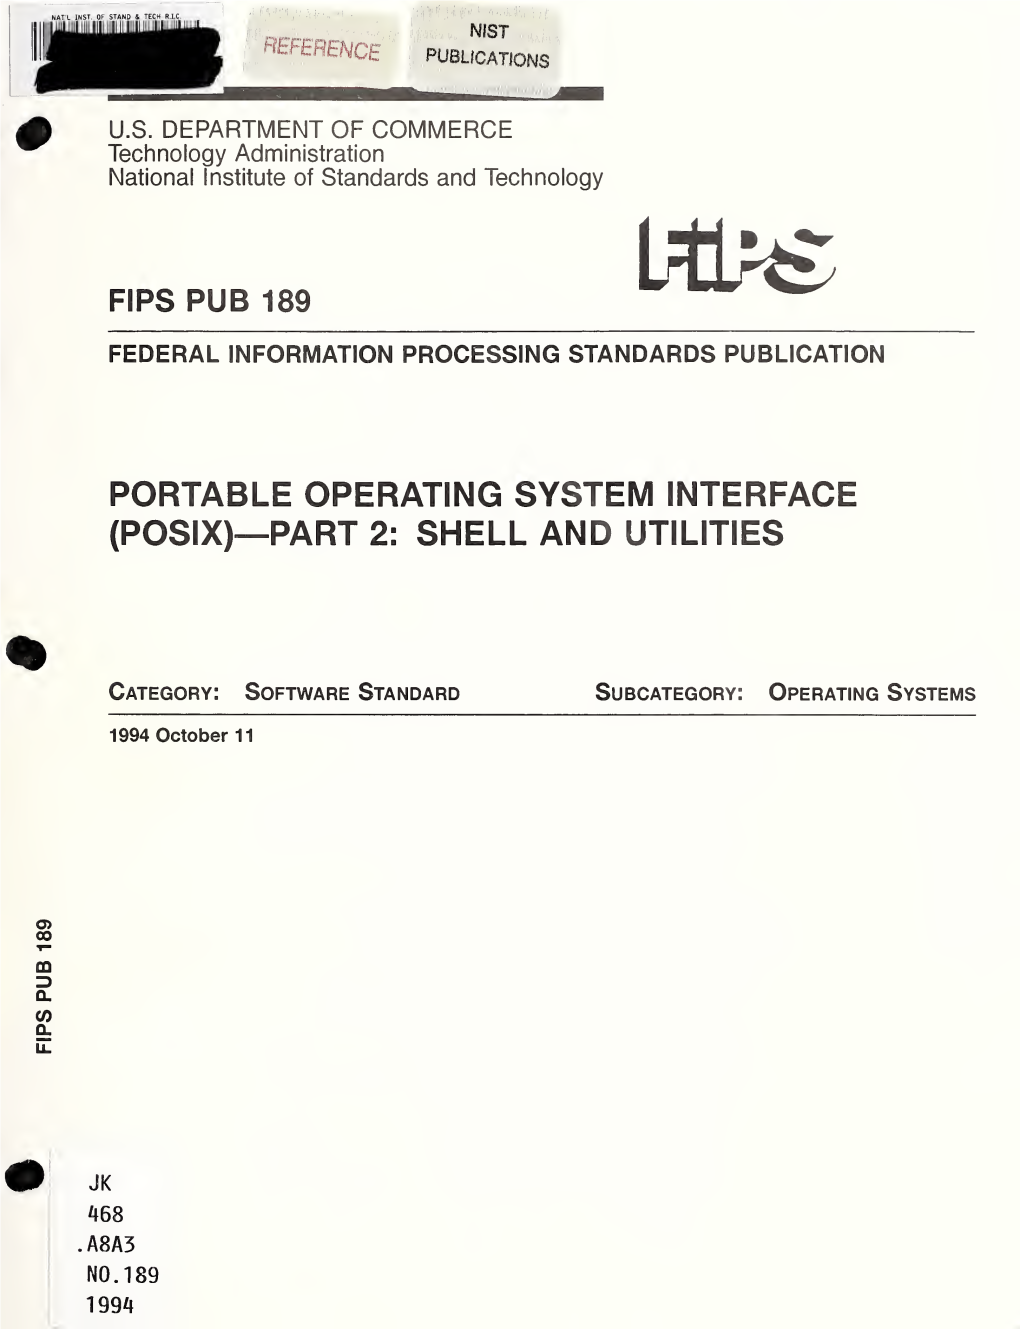 Federal Information Processing Standards Publication: Portable Operating System Interface (POSIX)